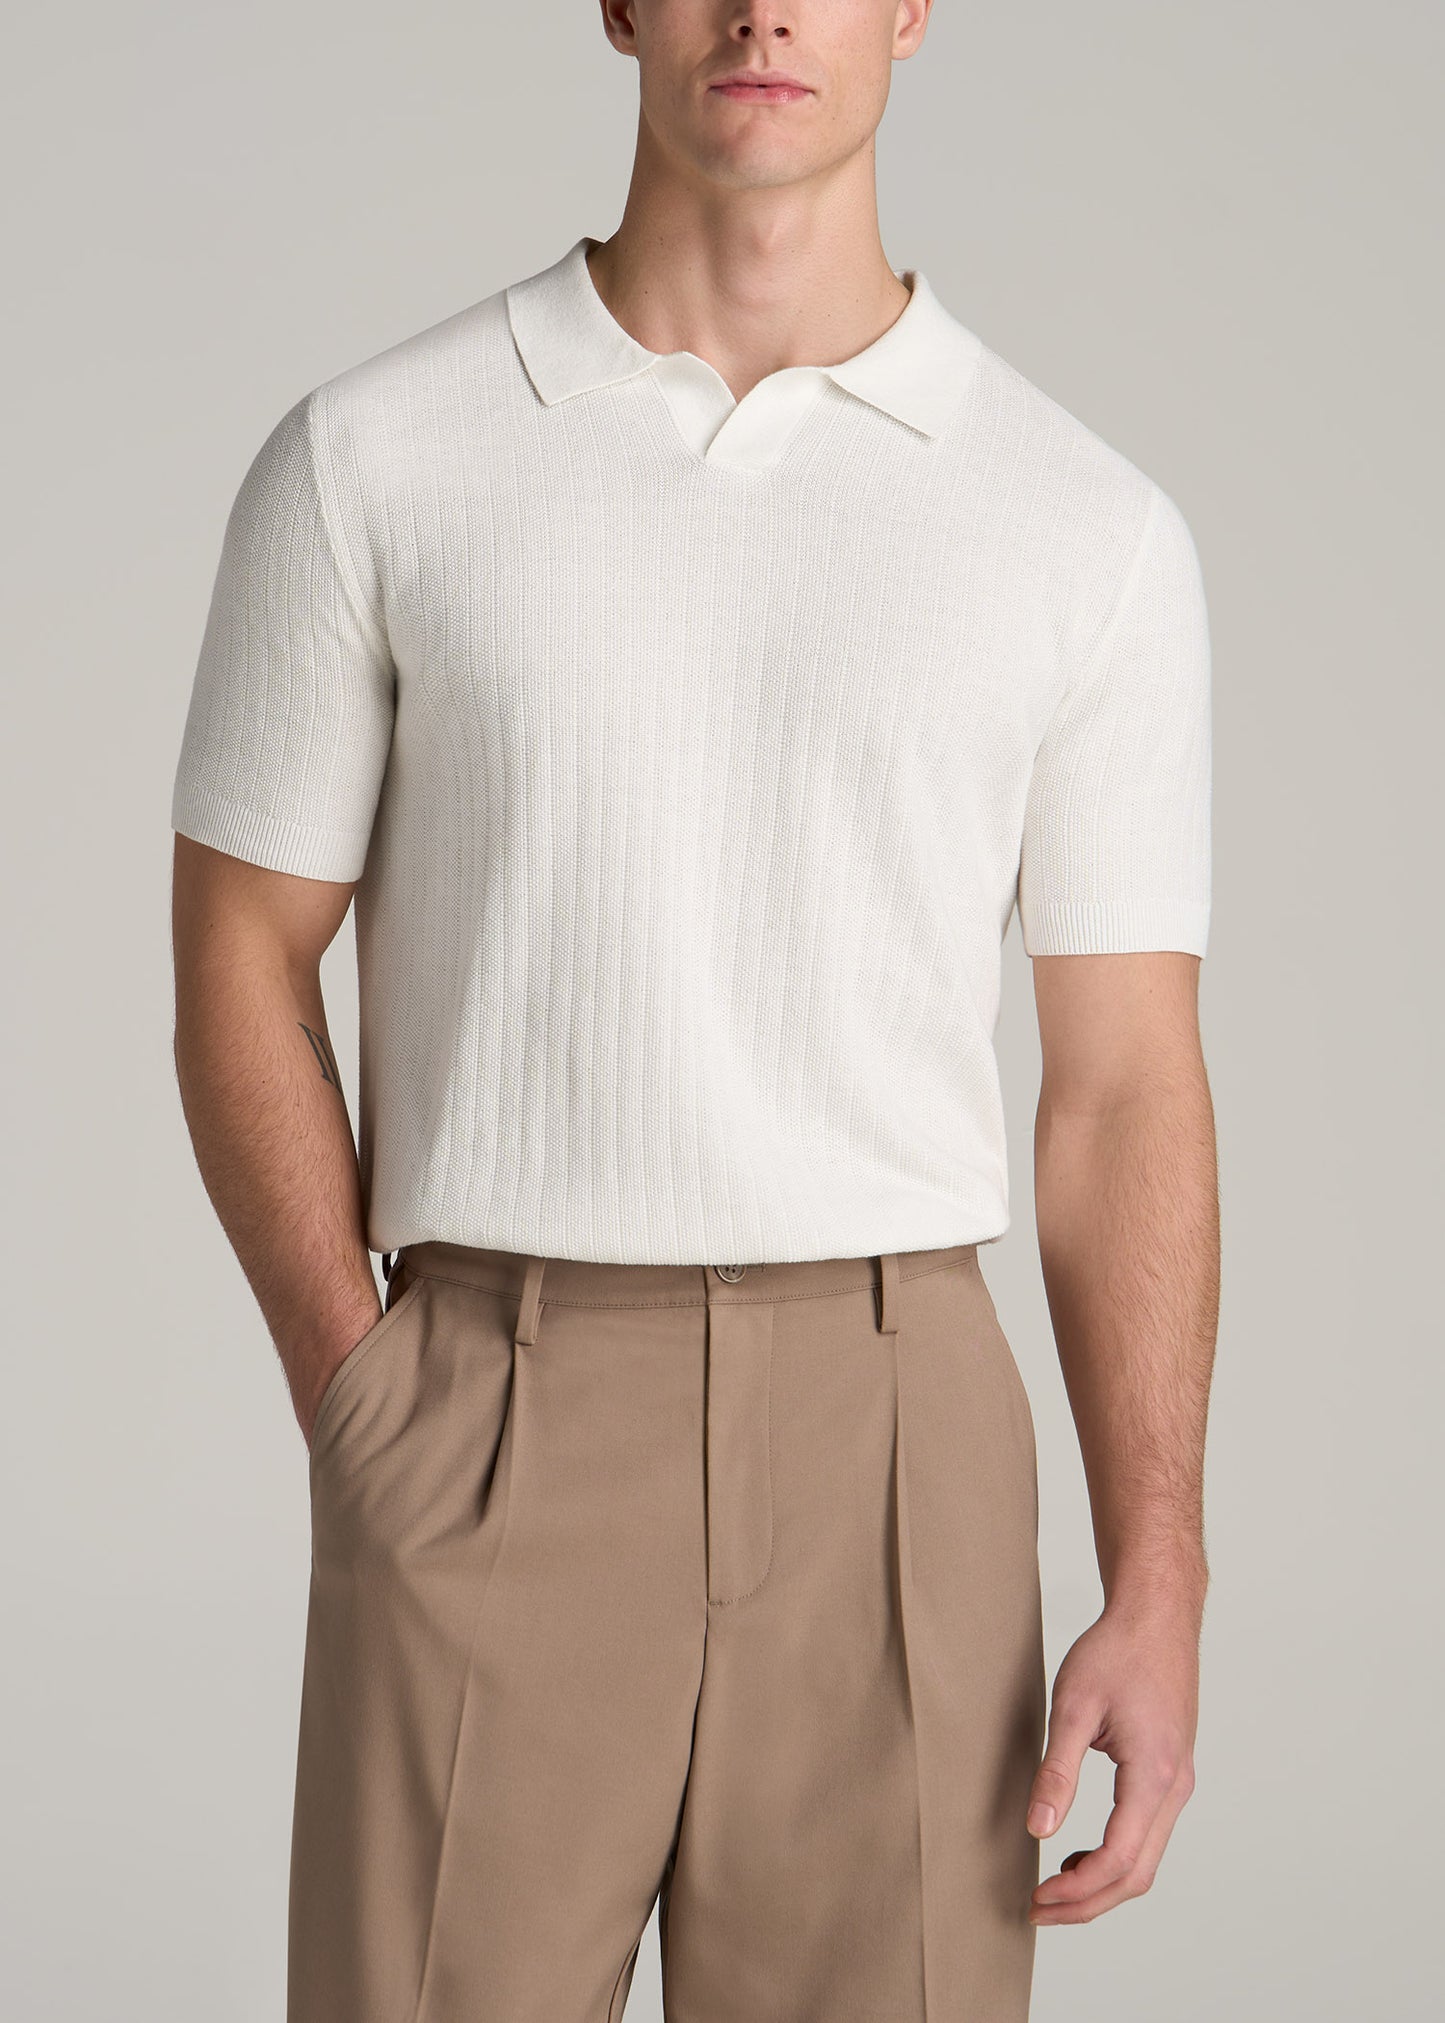 A tall man wearing American Tall's Linen Blend Ribbed Knit Polo Shirt for Tall Men in Ecru